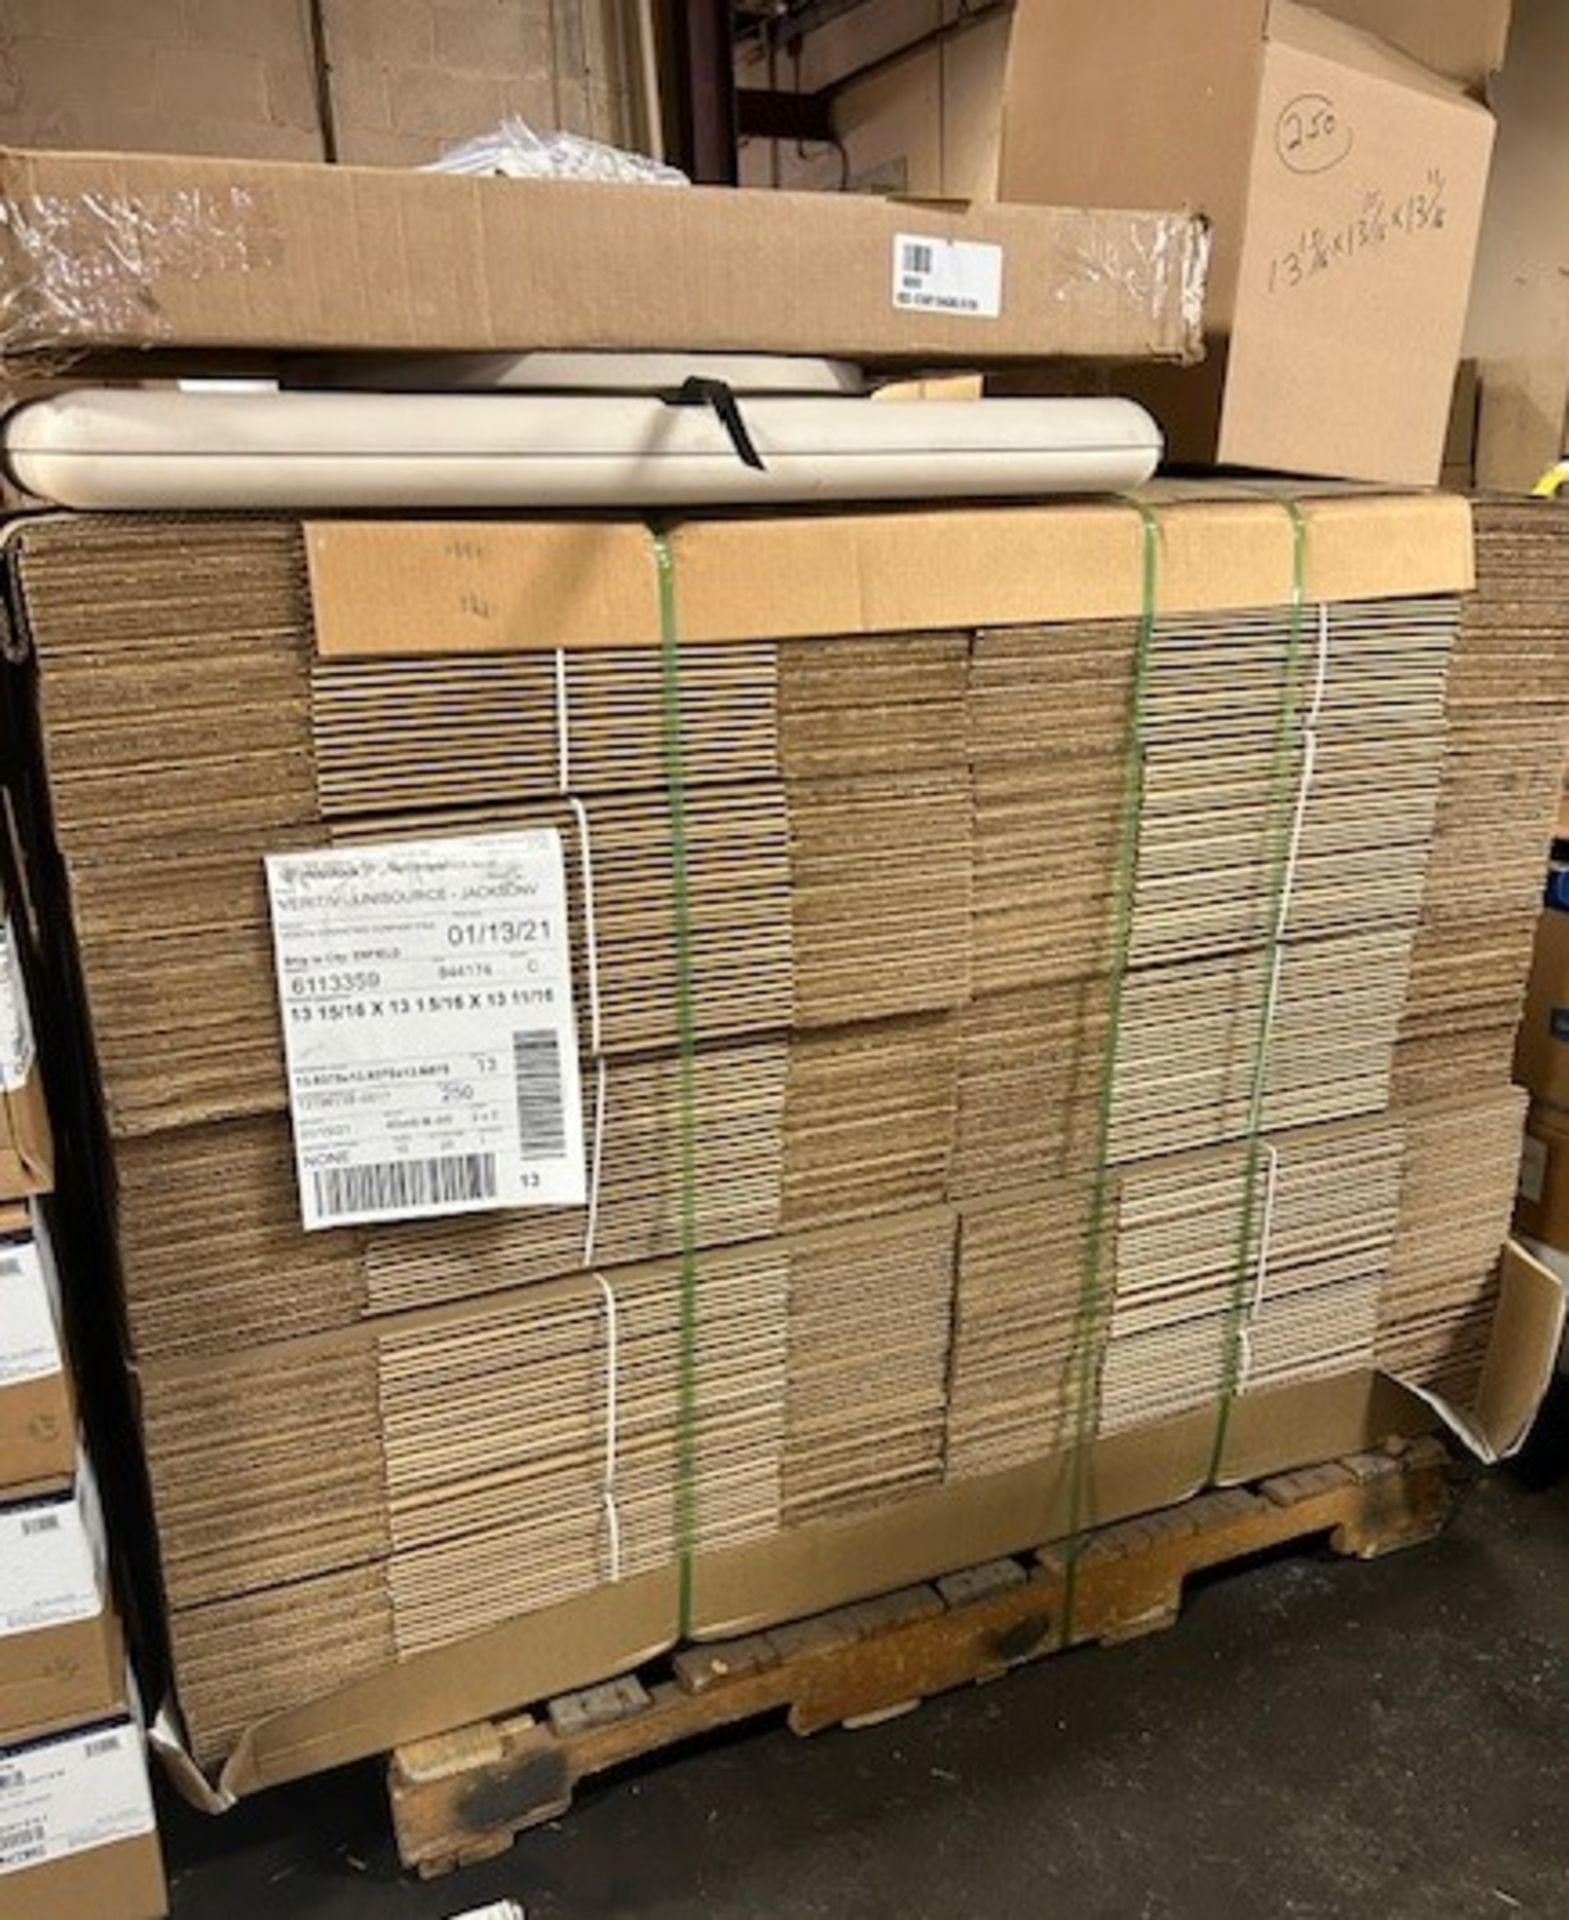 LOT - (250) 13-15/16 x 13-15/16 x 13-11/16 Brown Corrugated Boxes - Image 2 of 3